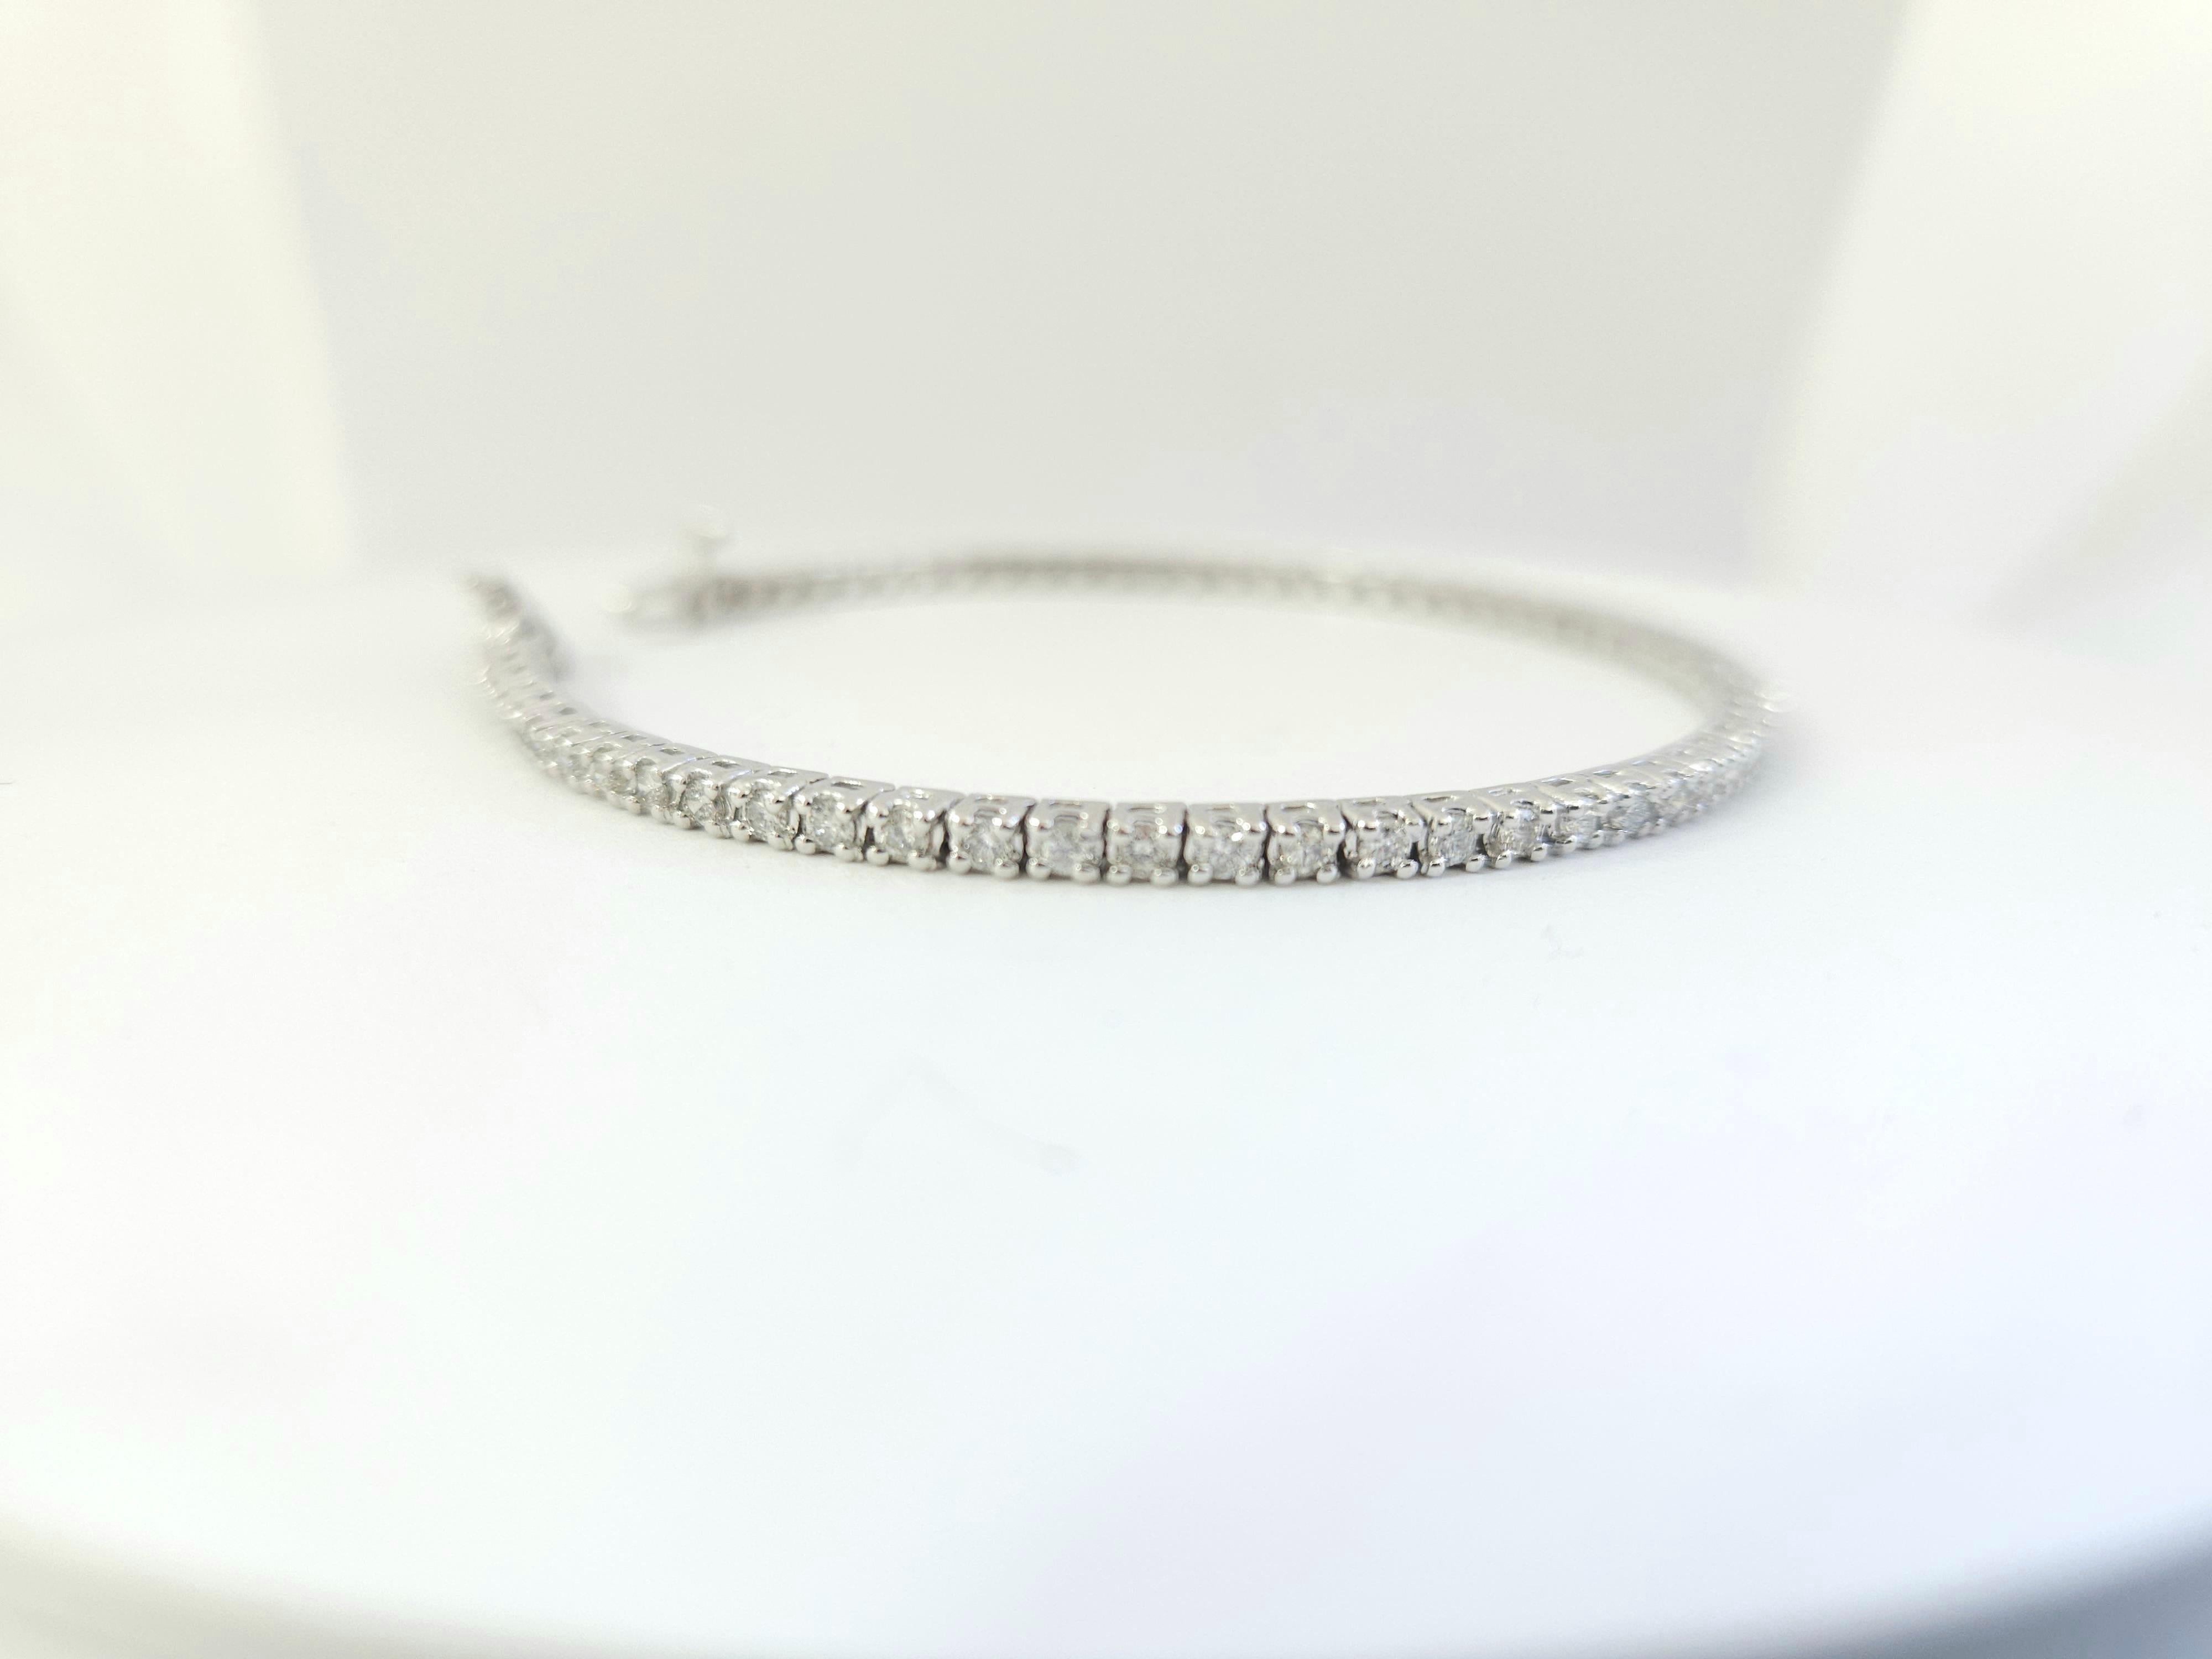 Natural diamonds tennis bracelet round-brilliant cut  14k white gold. 
7 inch. Average Color F, Clarity I 2.40 mm wide,66 pcs, 8.24 grams very shiny don't miss.

*Free shipping within U.S*

